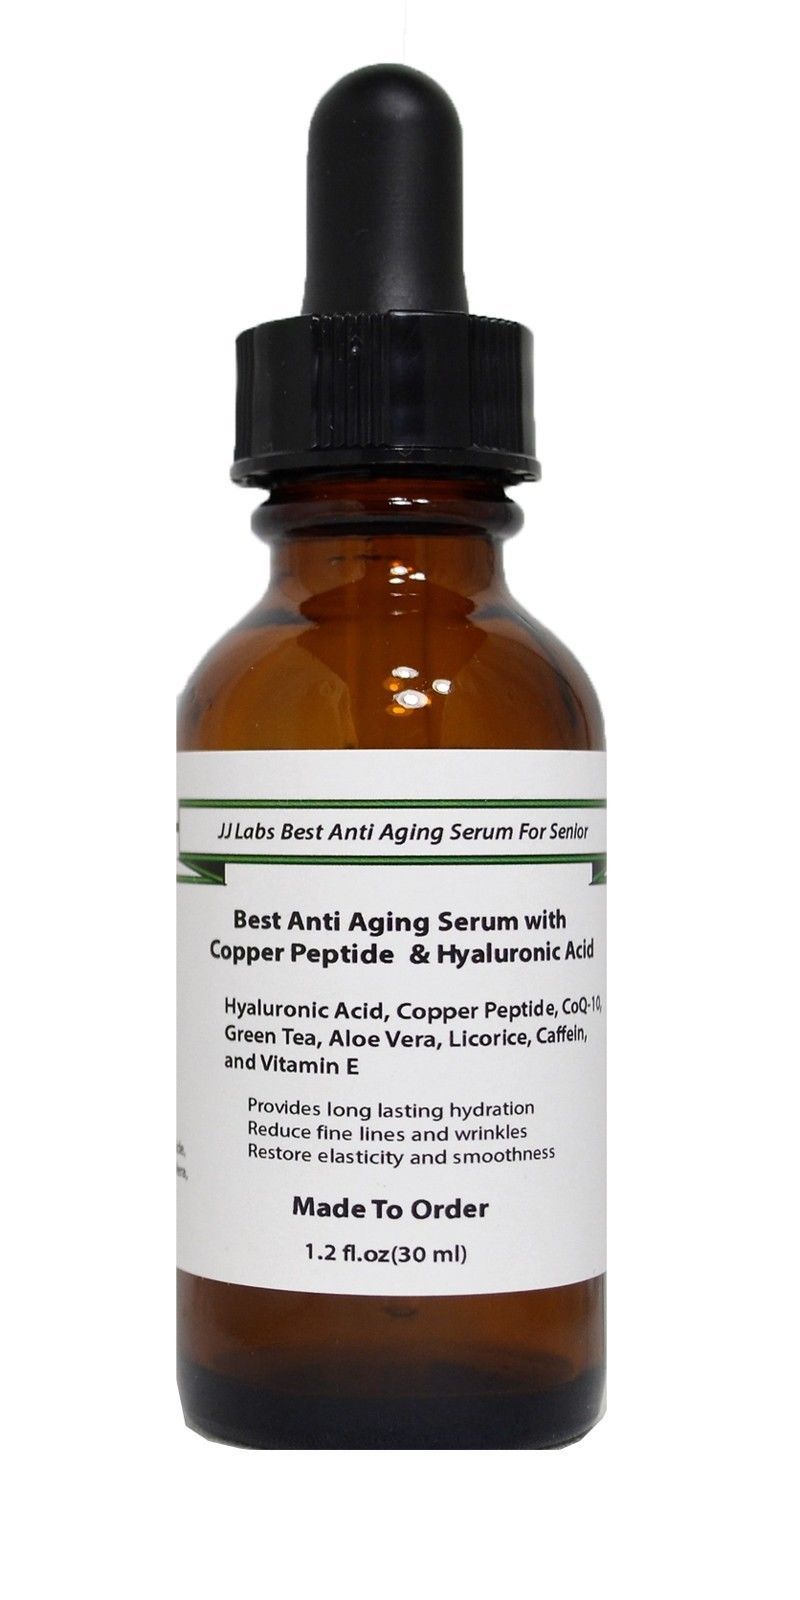 Senior Best Anti Aging Serum with Copper Peptide & Hyaluronic Acid - $17.33 - $27.23